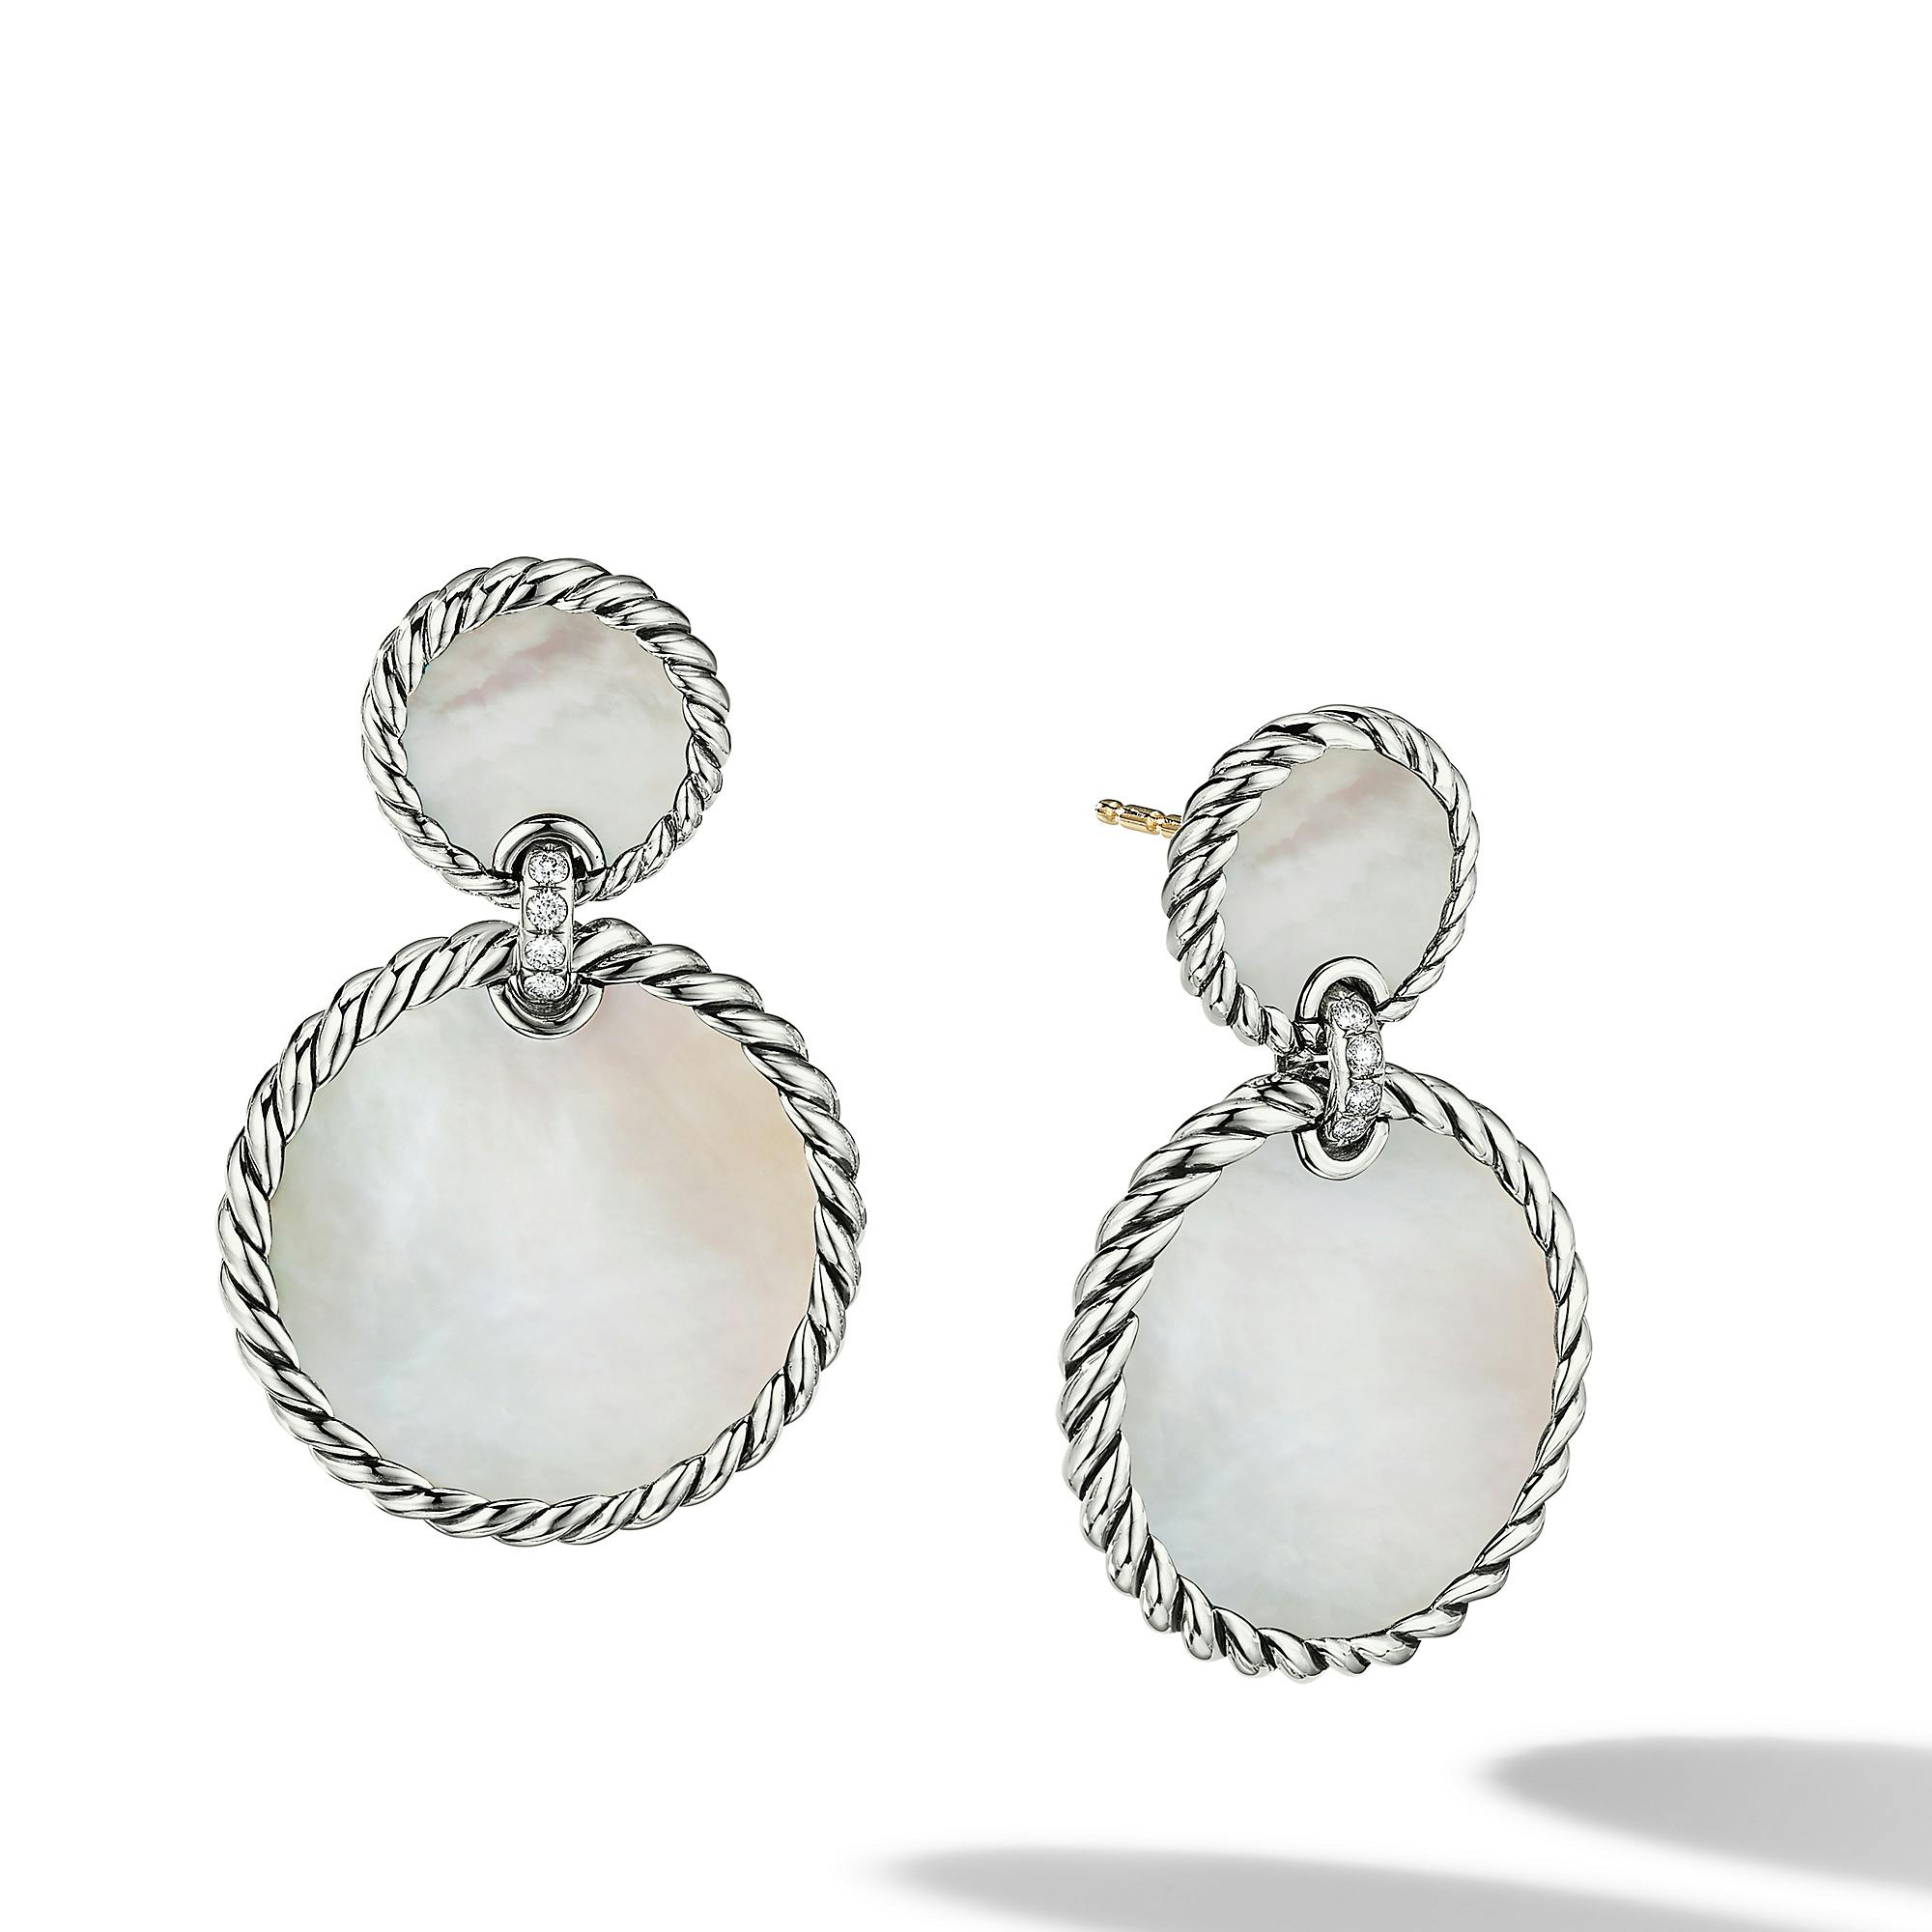 David Yurman DY Elements Double Drop Earrings with Mother of Pearl and Pave Diamonds